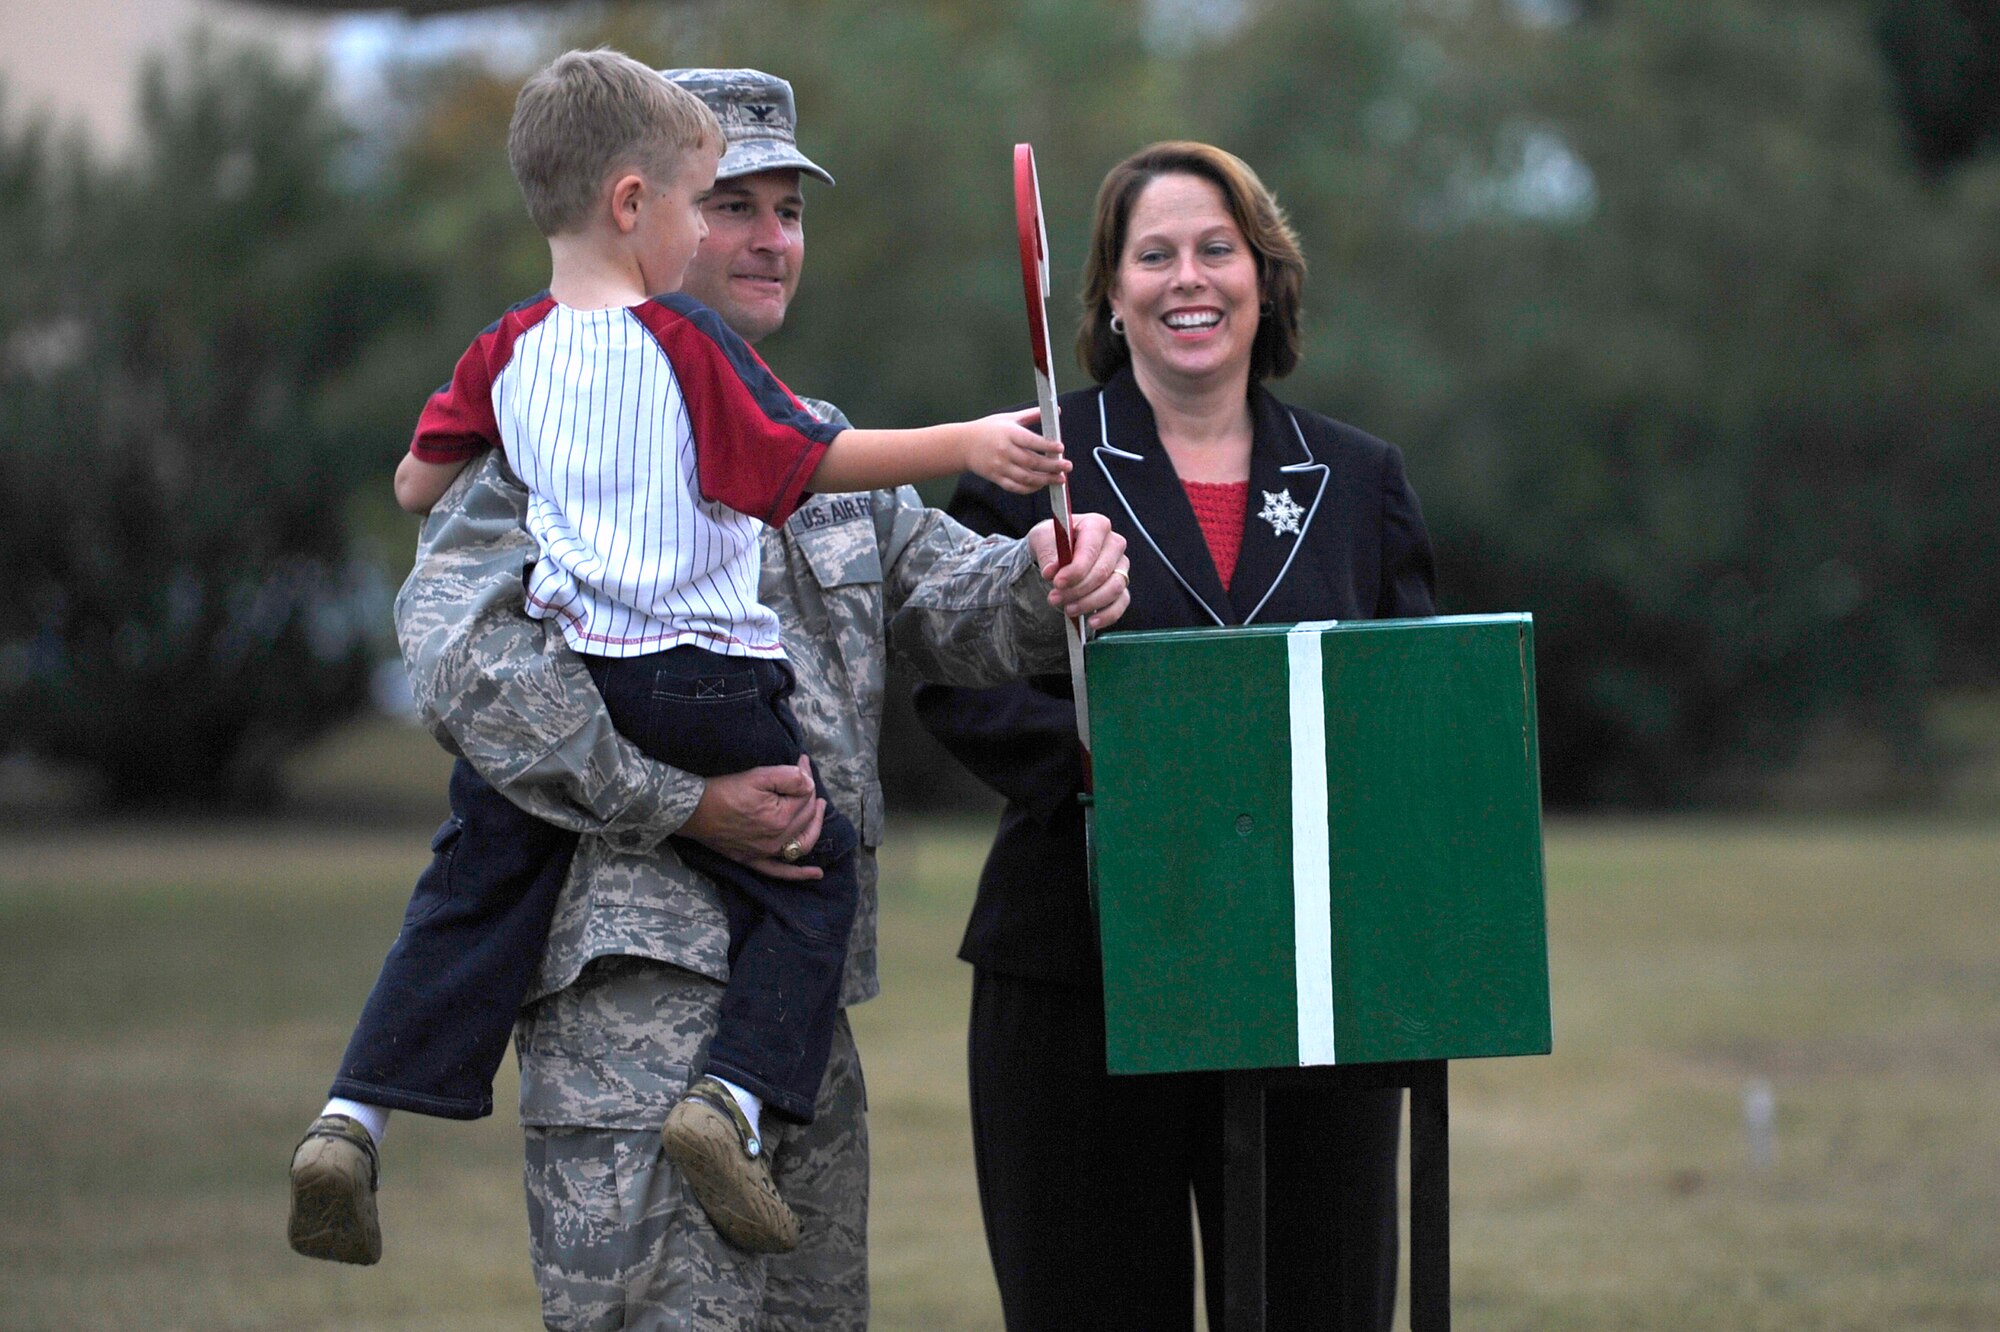 Col. Greg Lengyel, 1st Special Operations Wing commander, Col. Lengyel’s wife Diane, and four year old Eric Young pull the switch to eliminate the base Christmas tree lights during the Tree Lighting Ceremony at the Hurlburt Airpark Dec. 4. The ceremony included a presentation of awards for the holiday greeting card contest, Christmas caroling, the lighting of the 30-foot tree, and a visit from Santa. (U.S. Air Force Photo/Senior Airman Julianne Showalter)